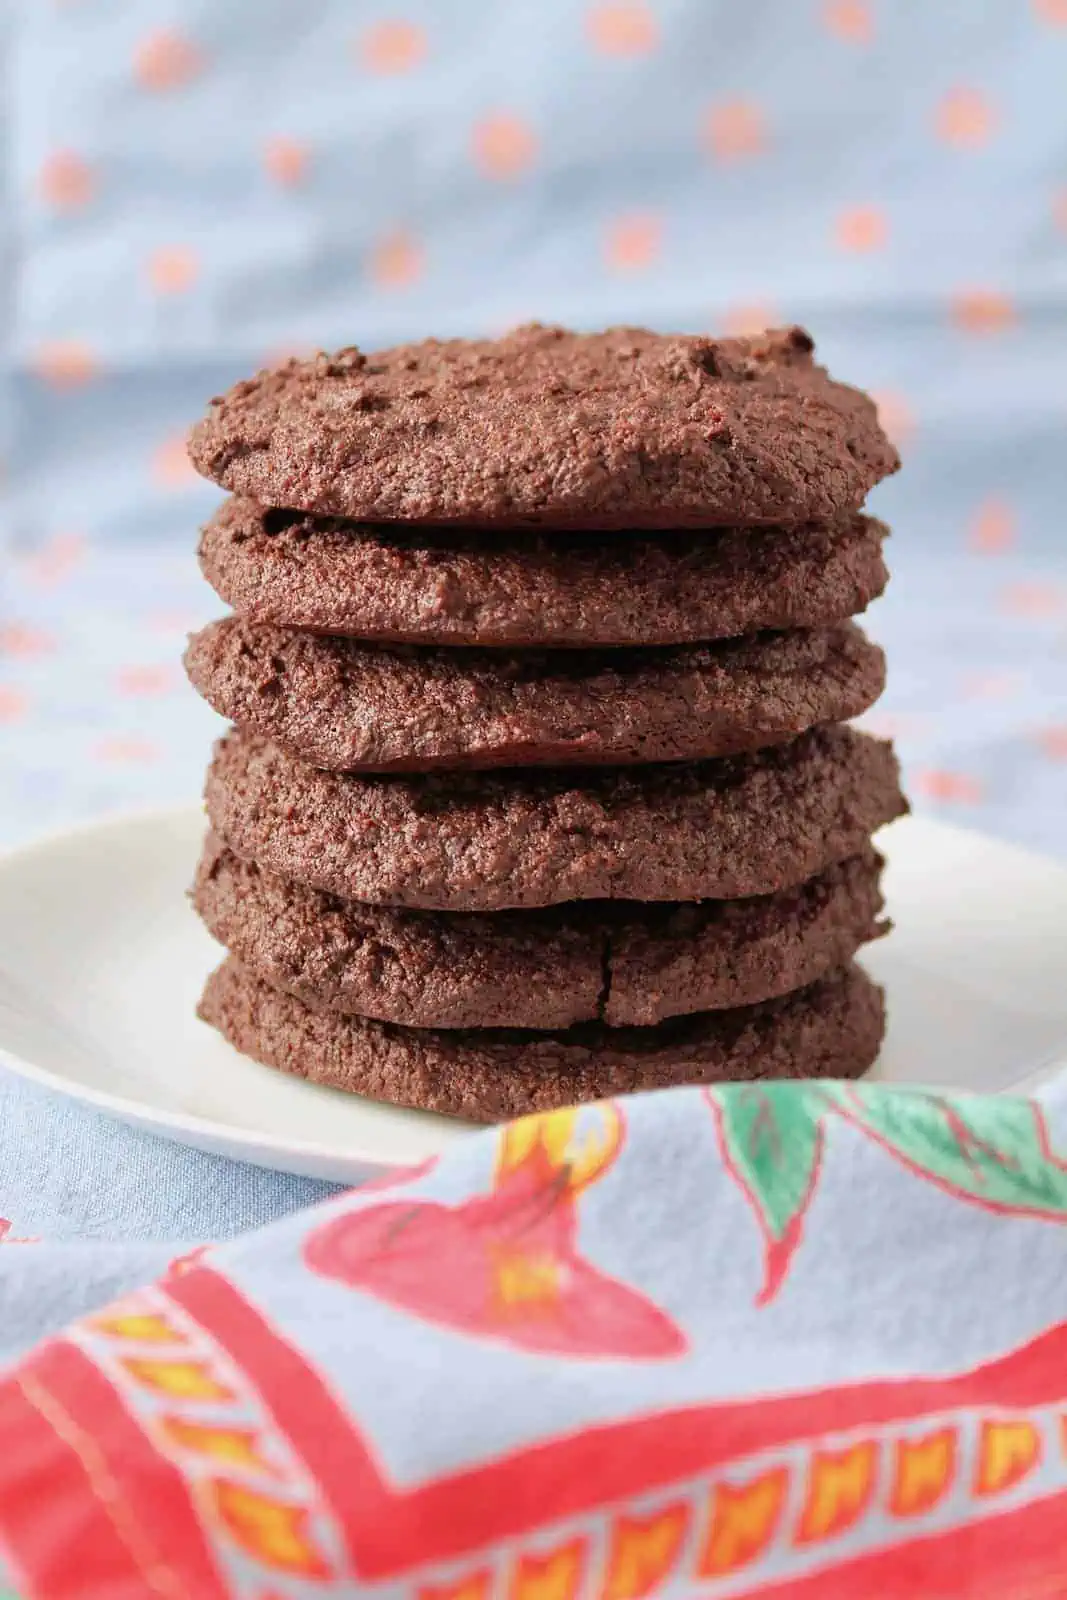 Six gluten free chocolate cookies stacked on top of each other on a white plate surrounded by blue table cloth with a red floral border